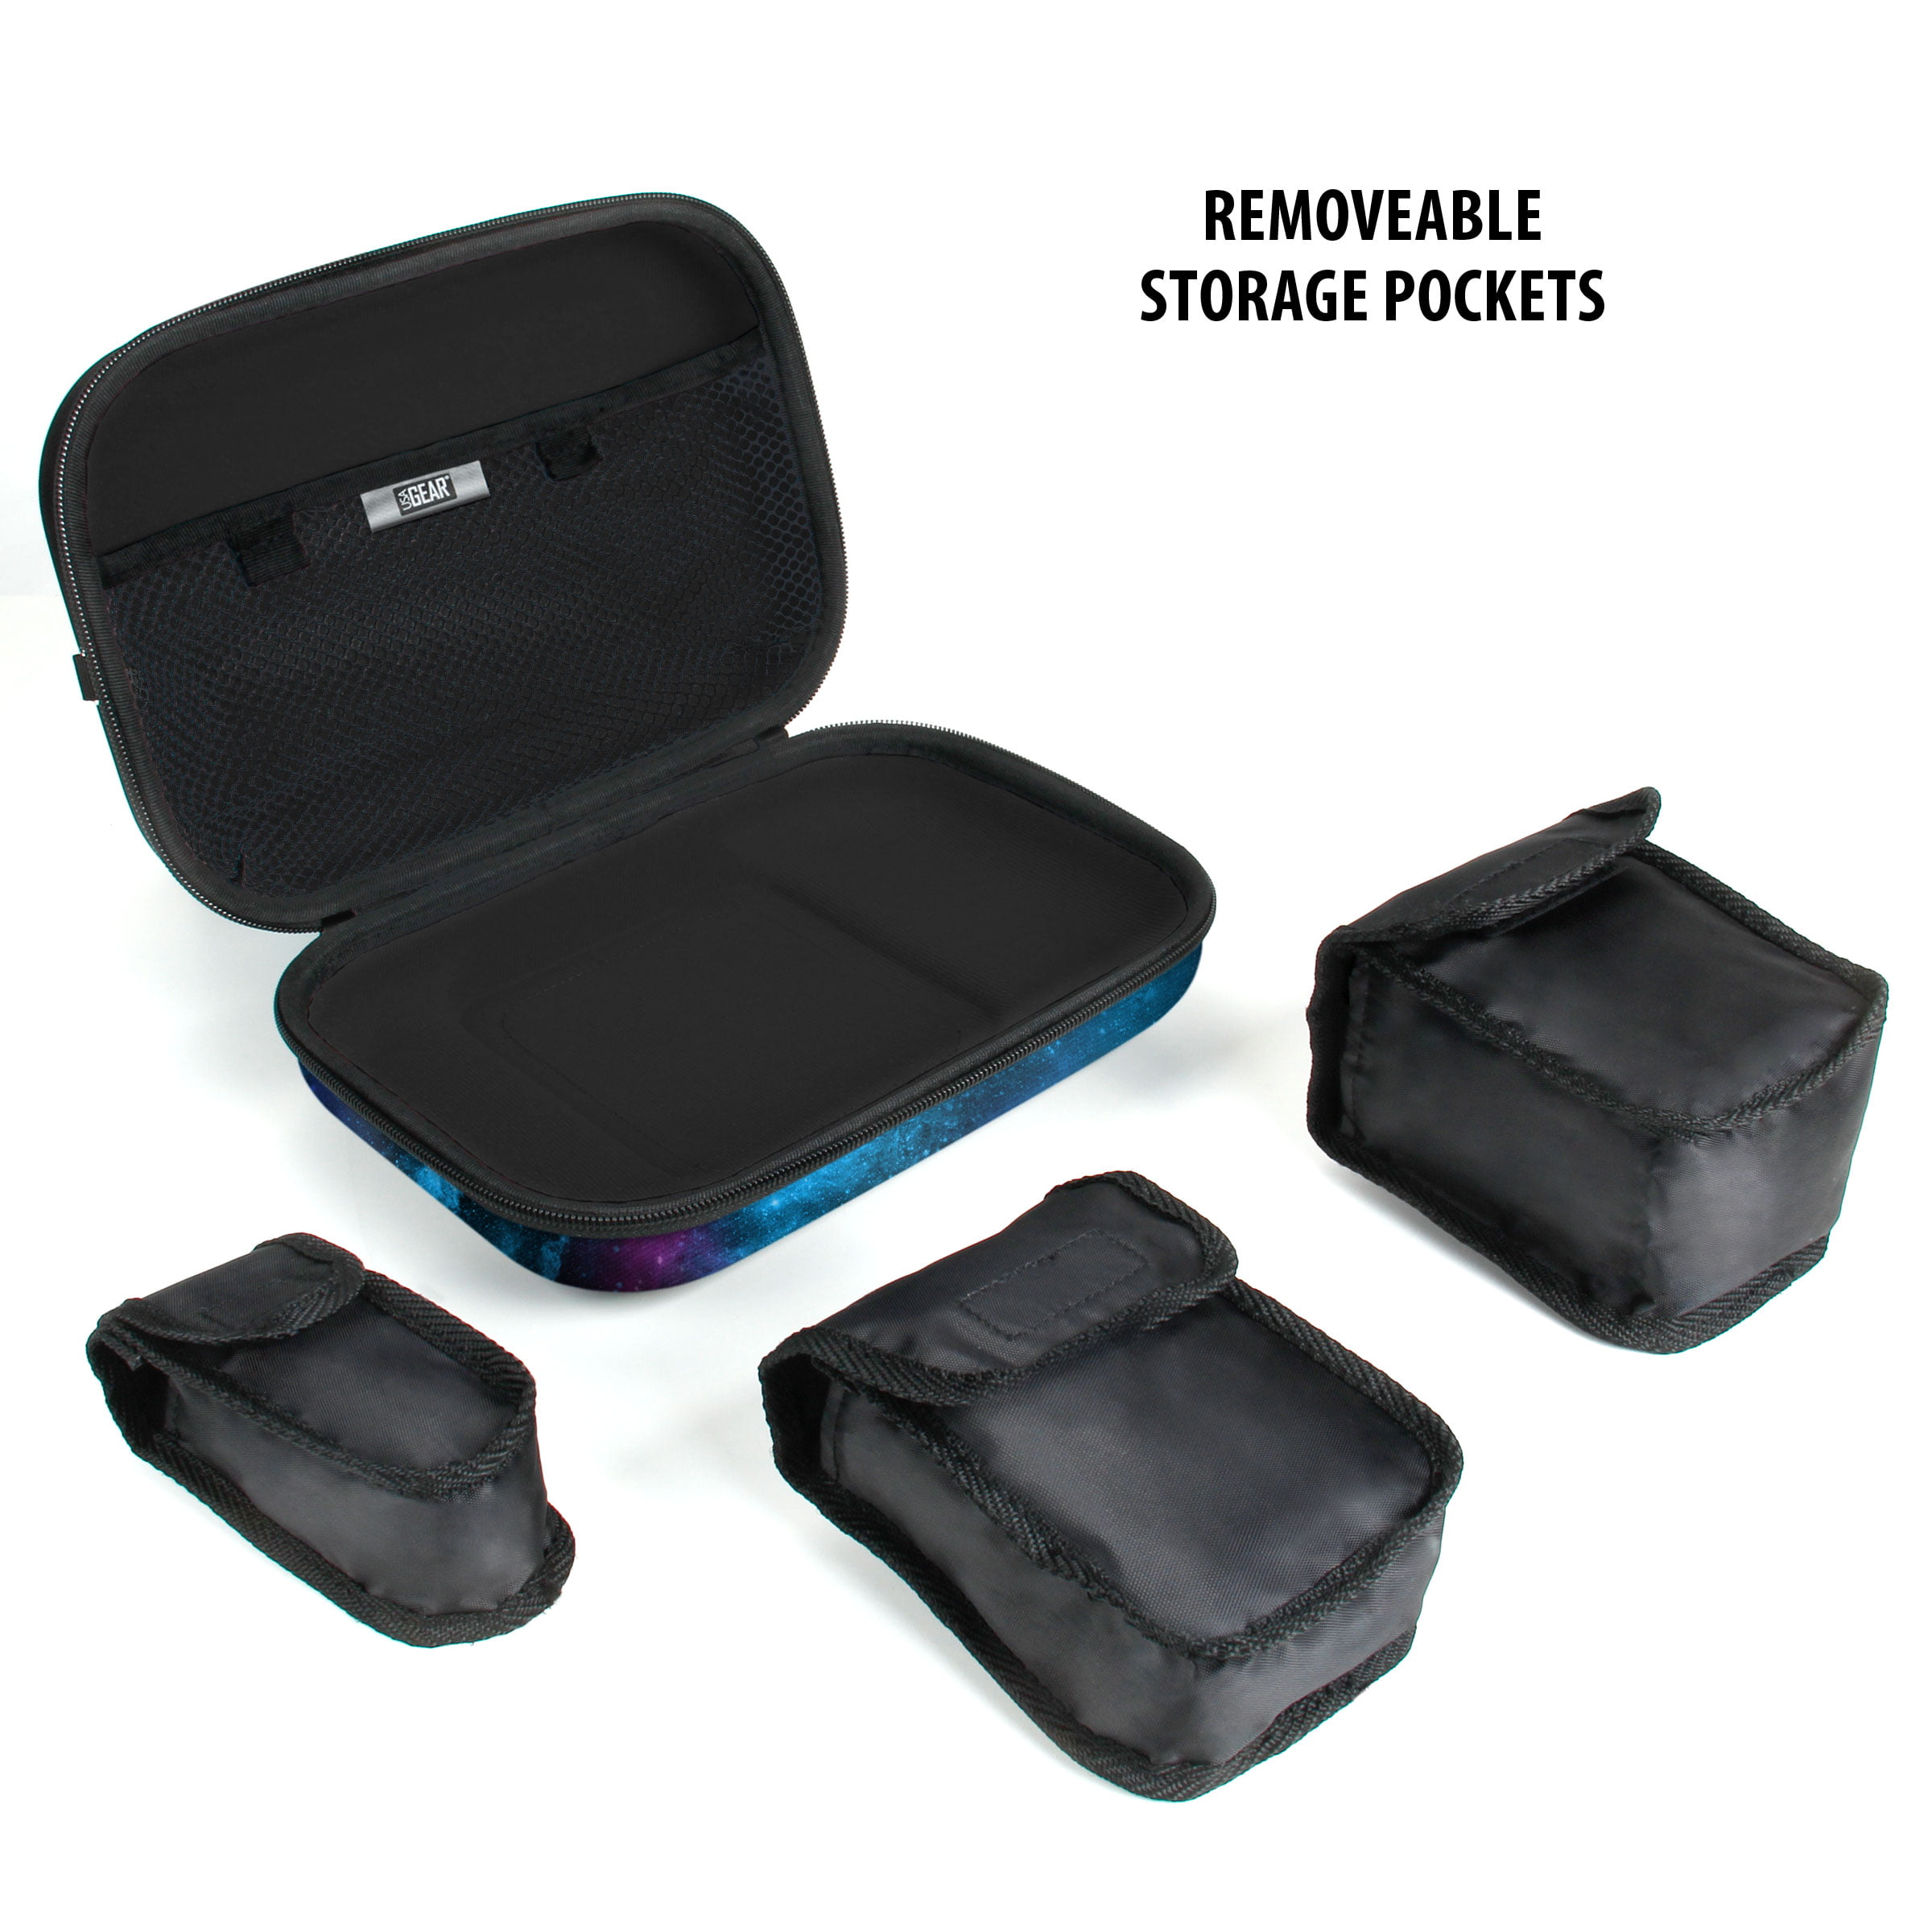 Rite in the Rain - ACCESSIBLE STORAGE. With two translucent storage  pockets, the NEW pocket organizer pouch is ideal for keeping your gear  organized. What's even better are the multi-directional belt loops